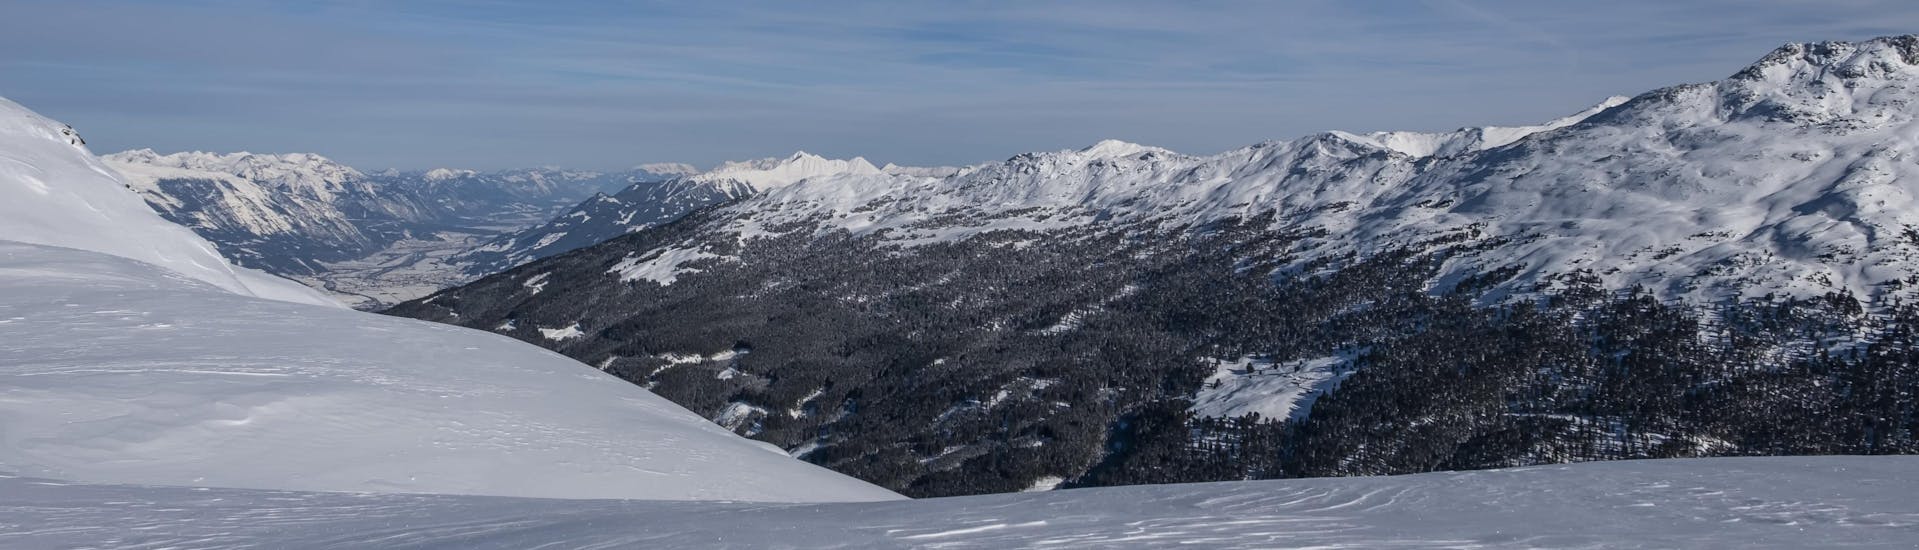 A view of the snow-capped peak of the Glungezer, where local ski schools take aspiring skiers for their ski lessons.